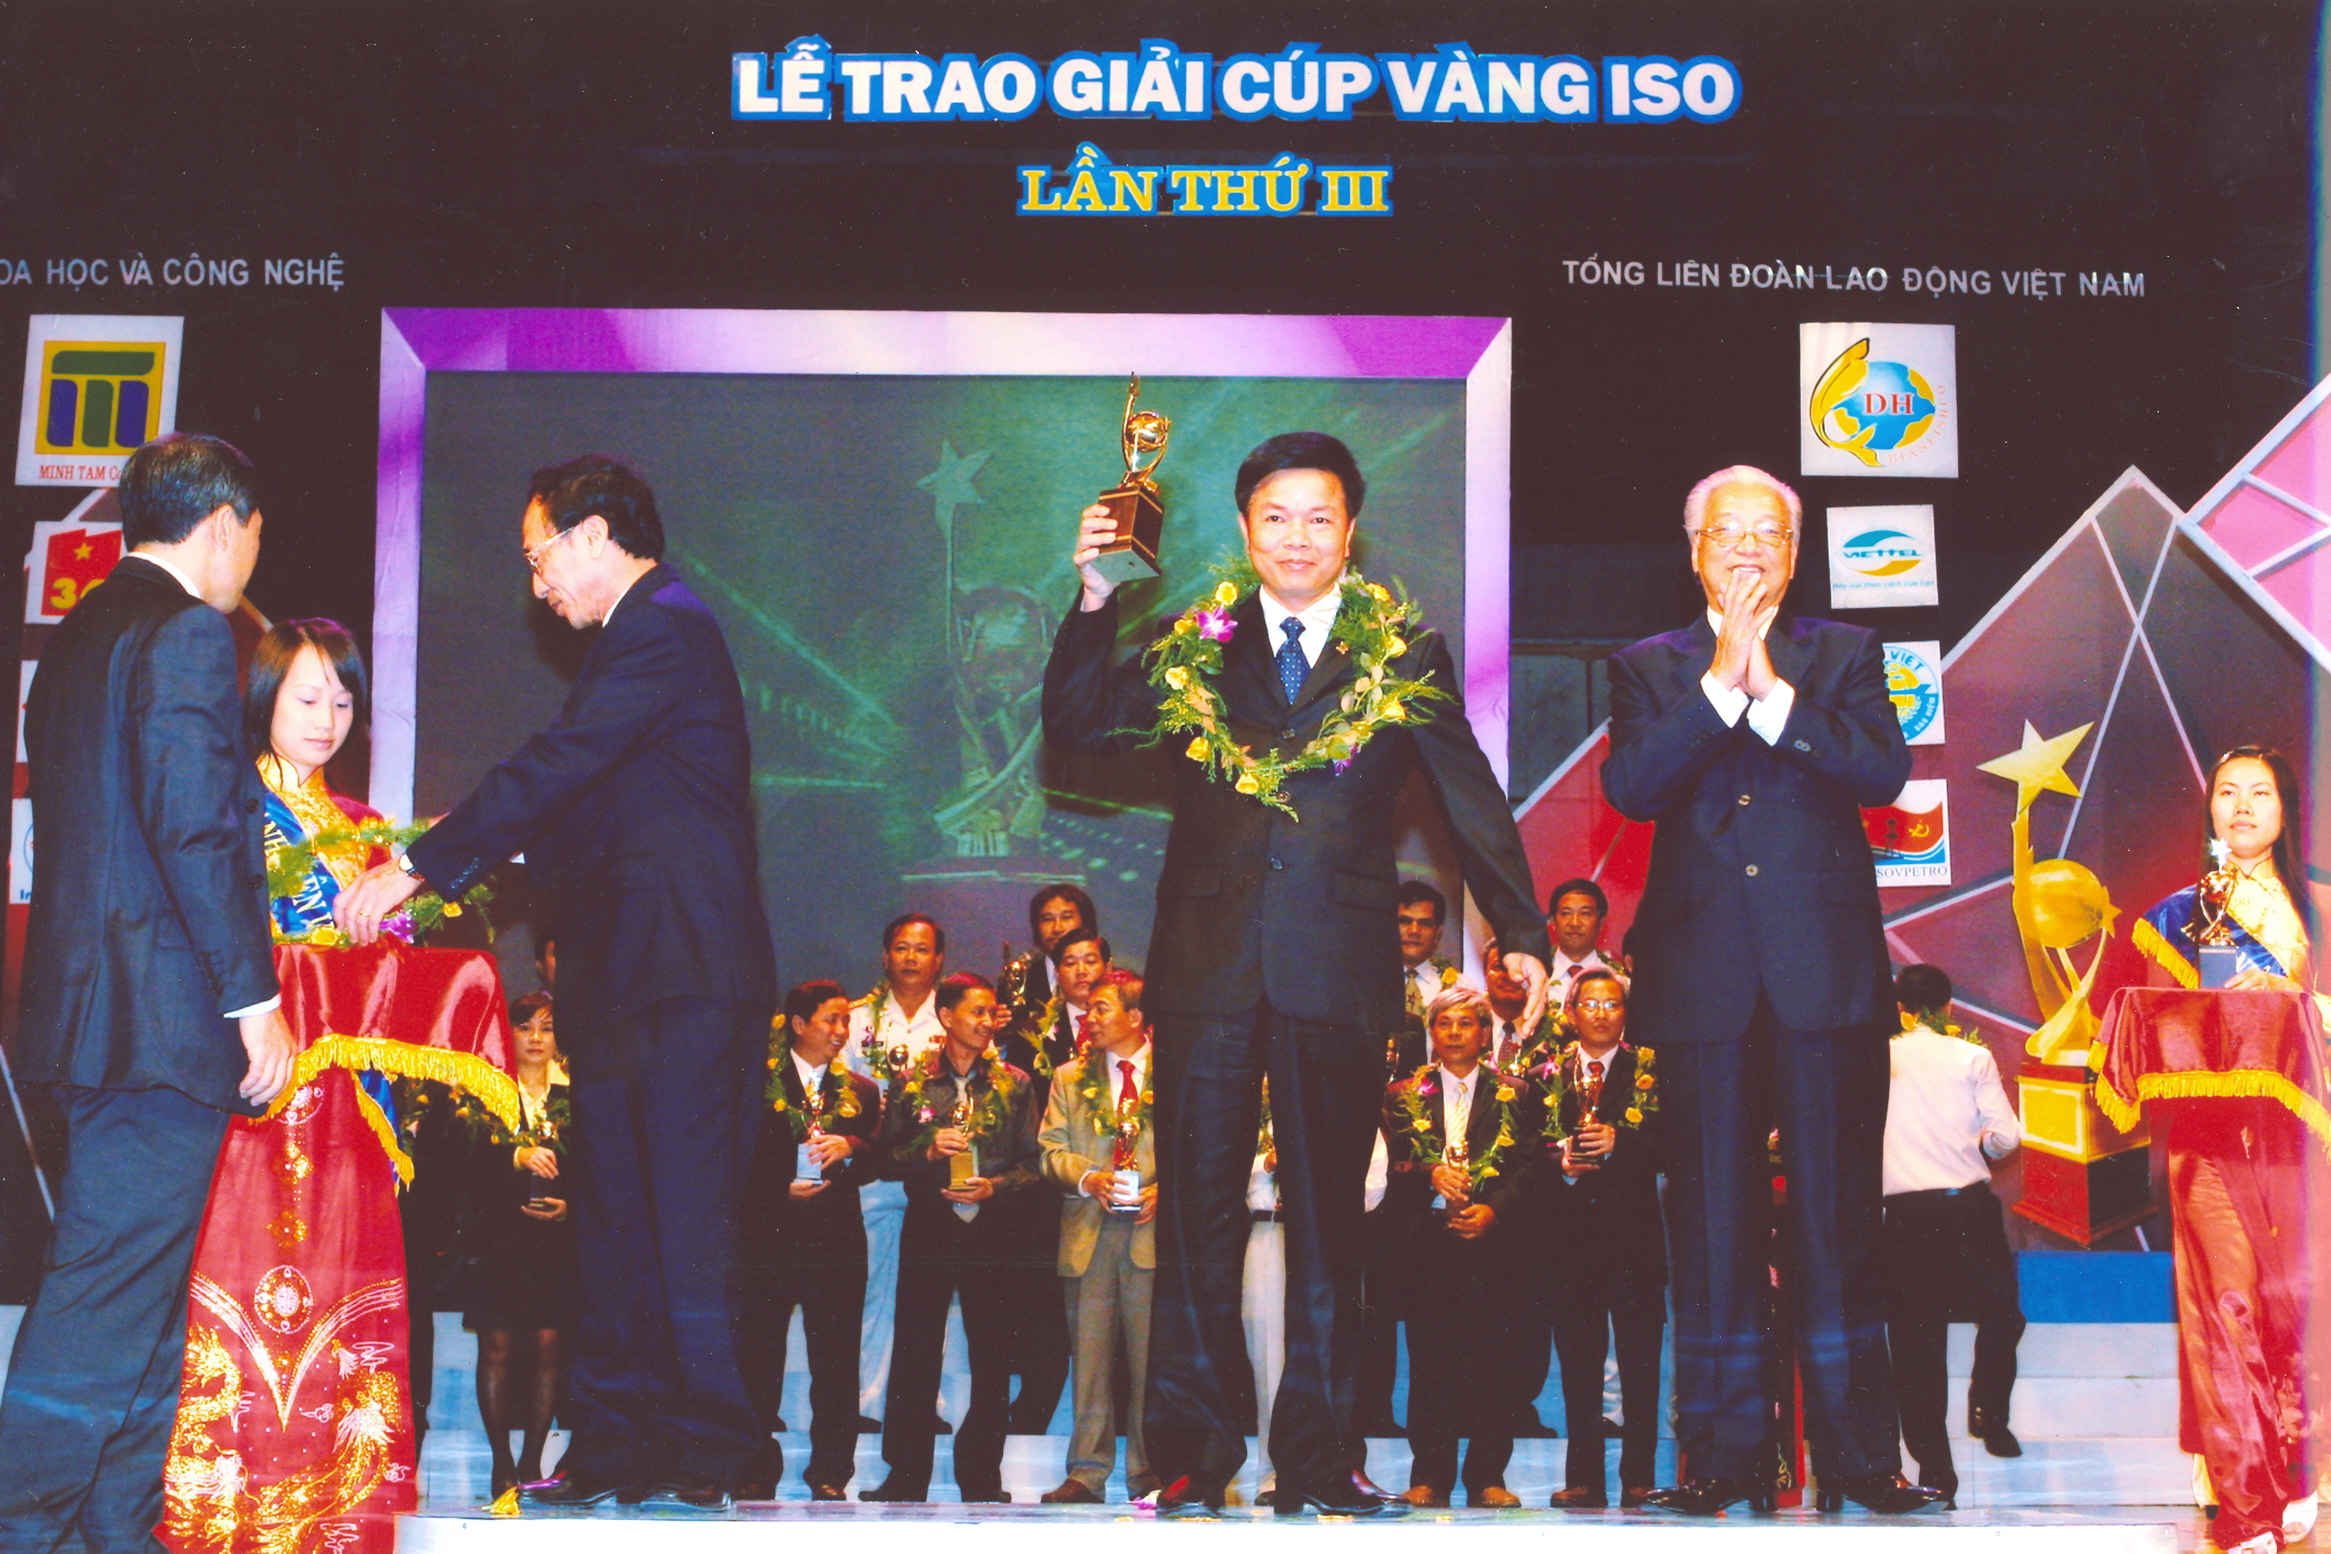 Mr. Cao Thanh Dong at the Awarding Ceremony